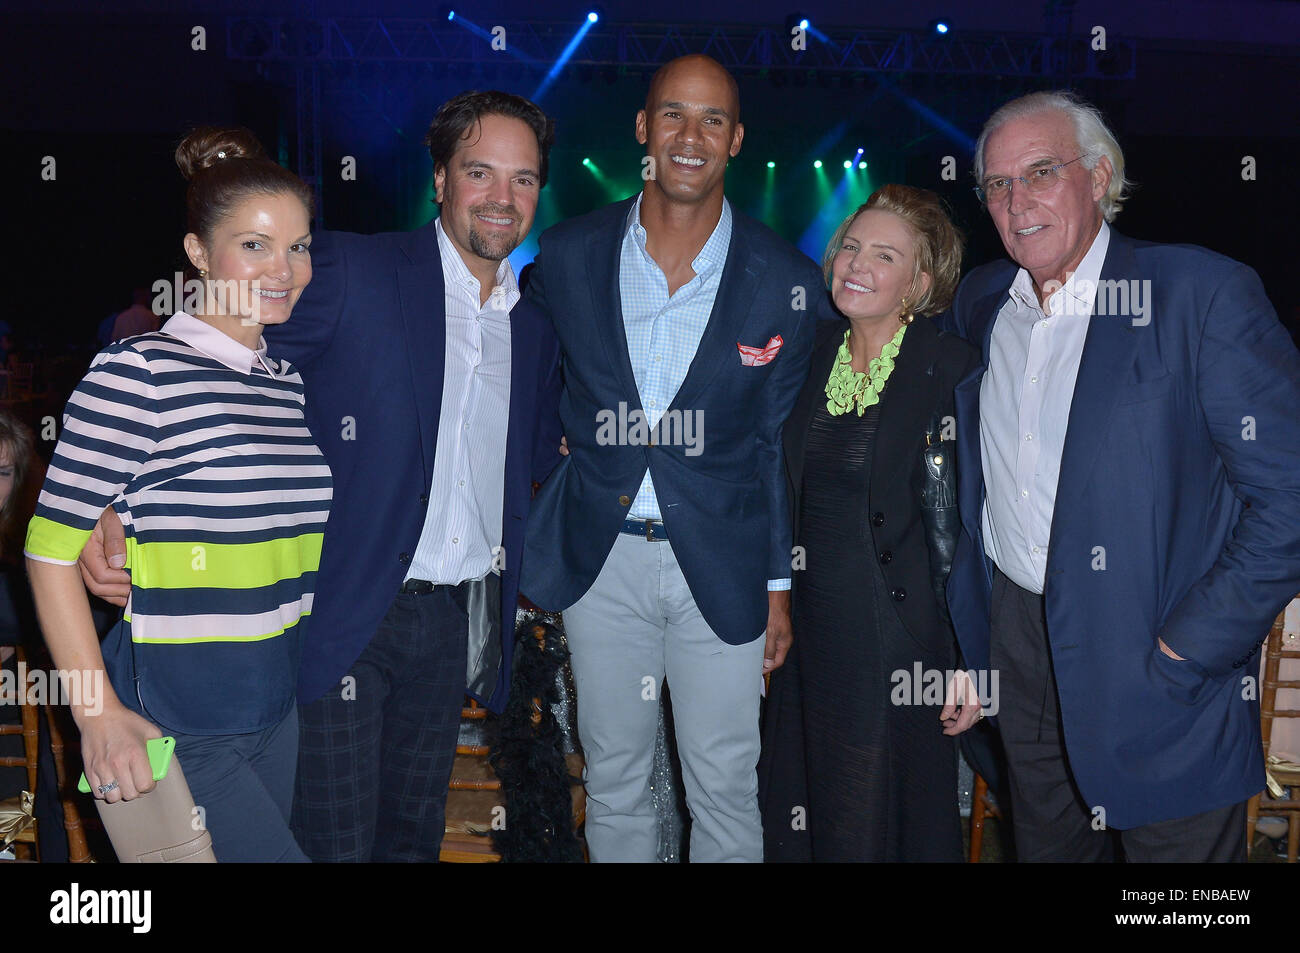 14th Annual Footys Bubbles And Bones Gala at Westin Diplomat  Featuring: Alicia Rickter,Mike Piazza,Jason Taylor,Lesley Visser,Bob Kanuth Where: Hollywood, Florida, United States When: 25 Oct 2014 Stock Photo